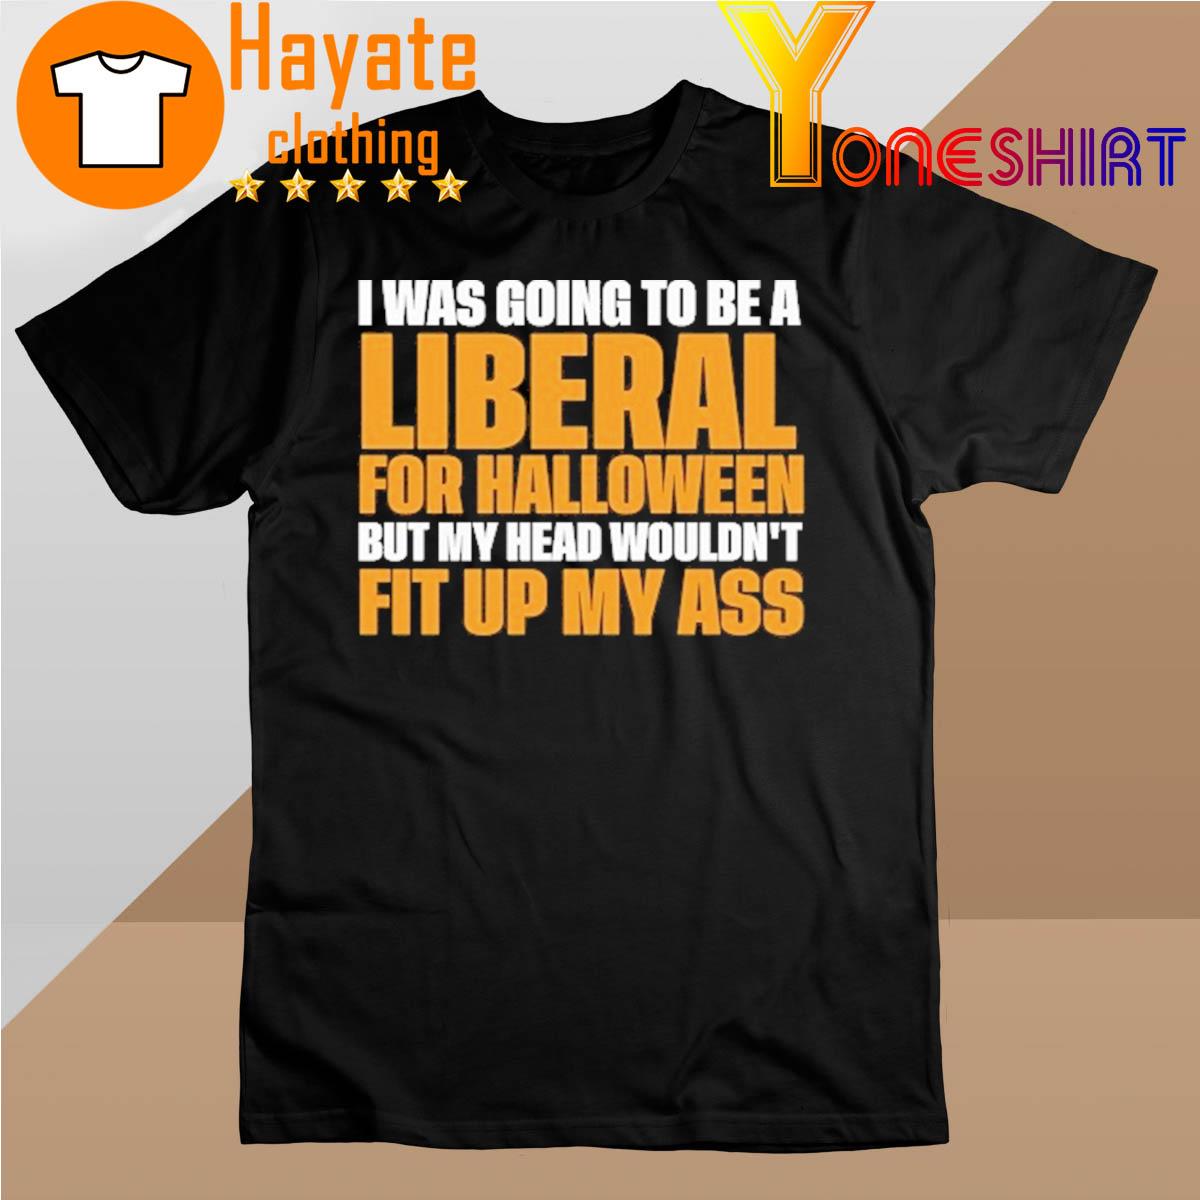 Was Going To Be A Liberal For Halloween But My Head Wouldn't Fit Up My Ass shirt